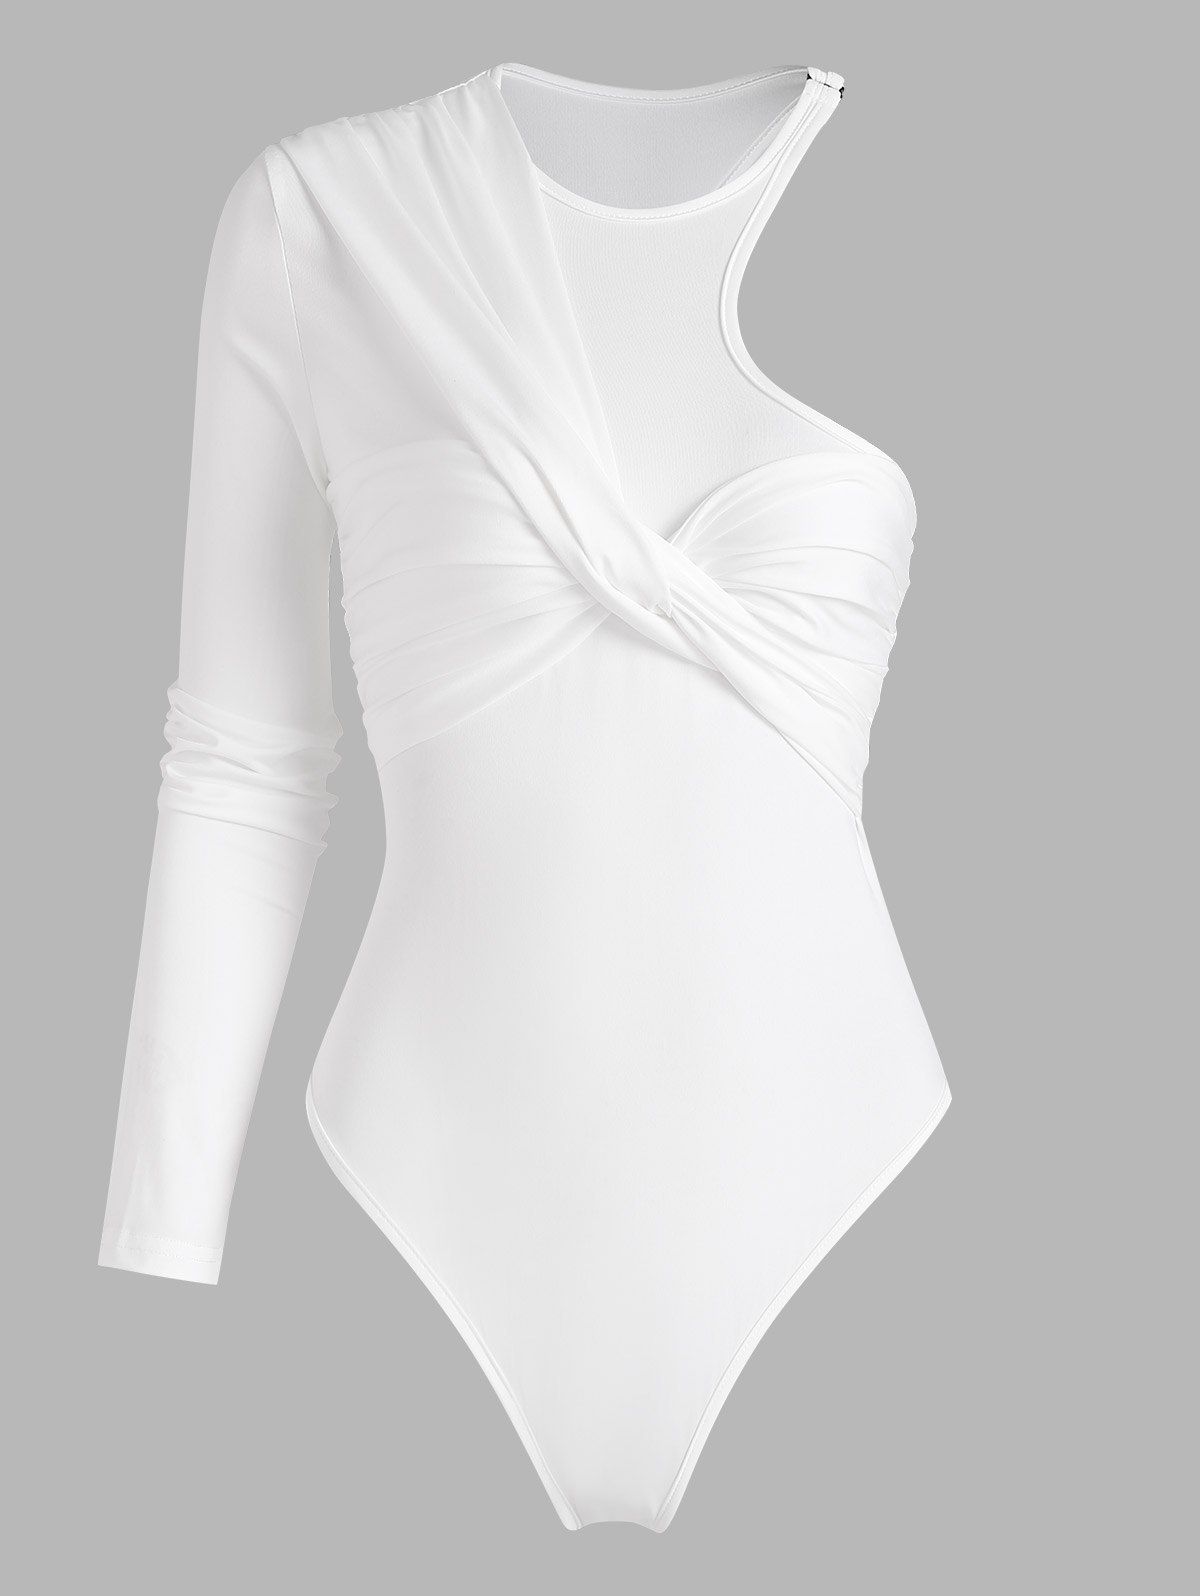 One Sleeve Twisted Bodysuit - WHITE L